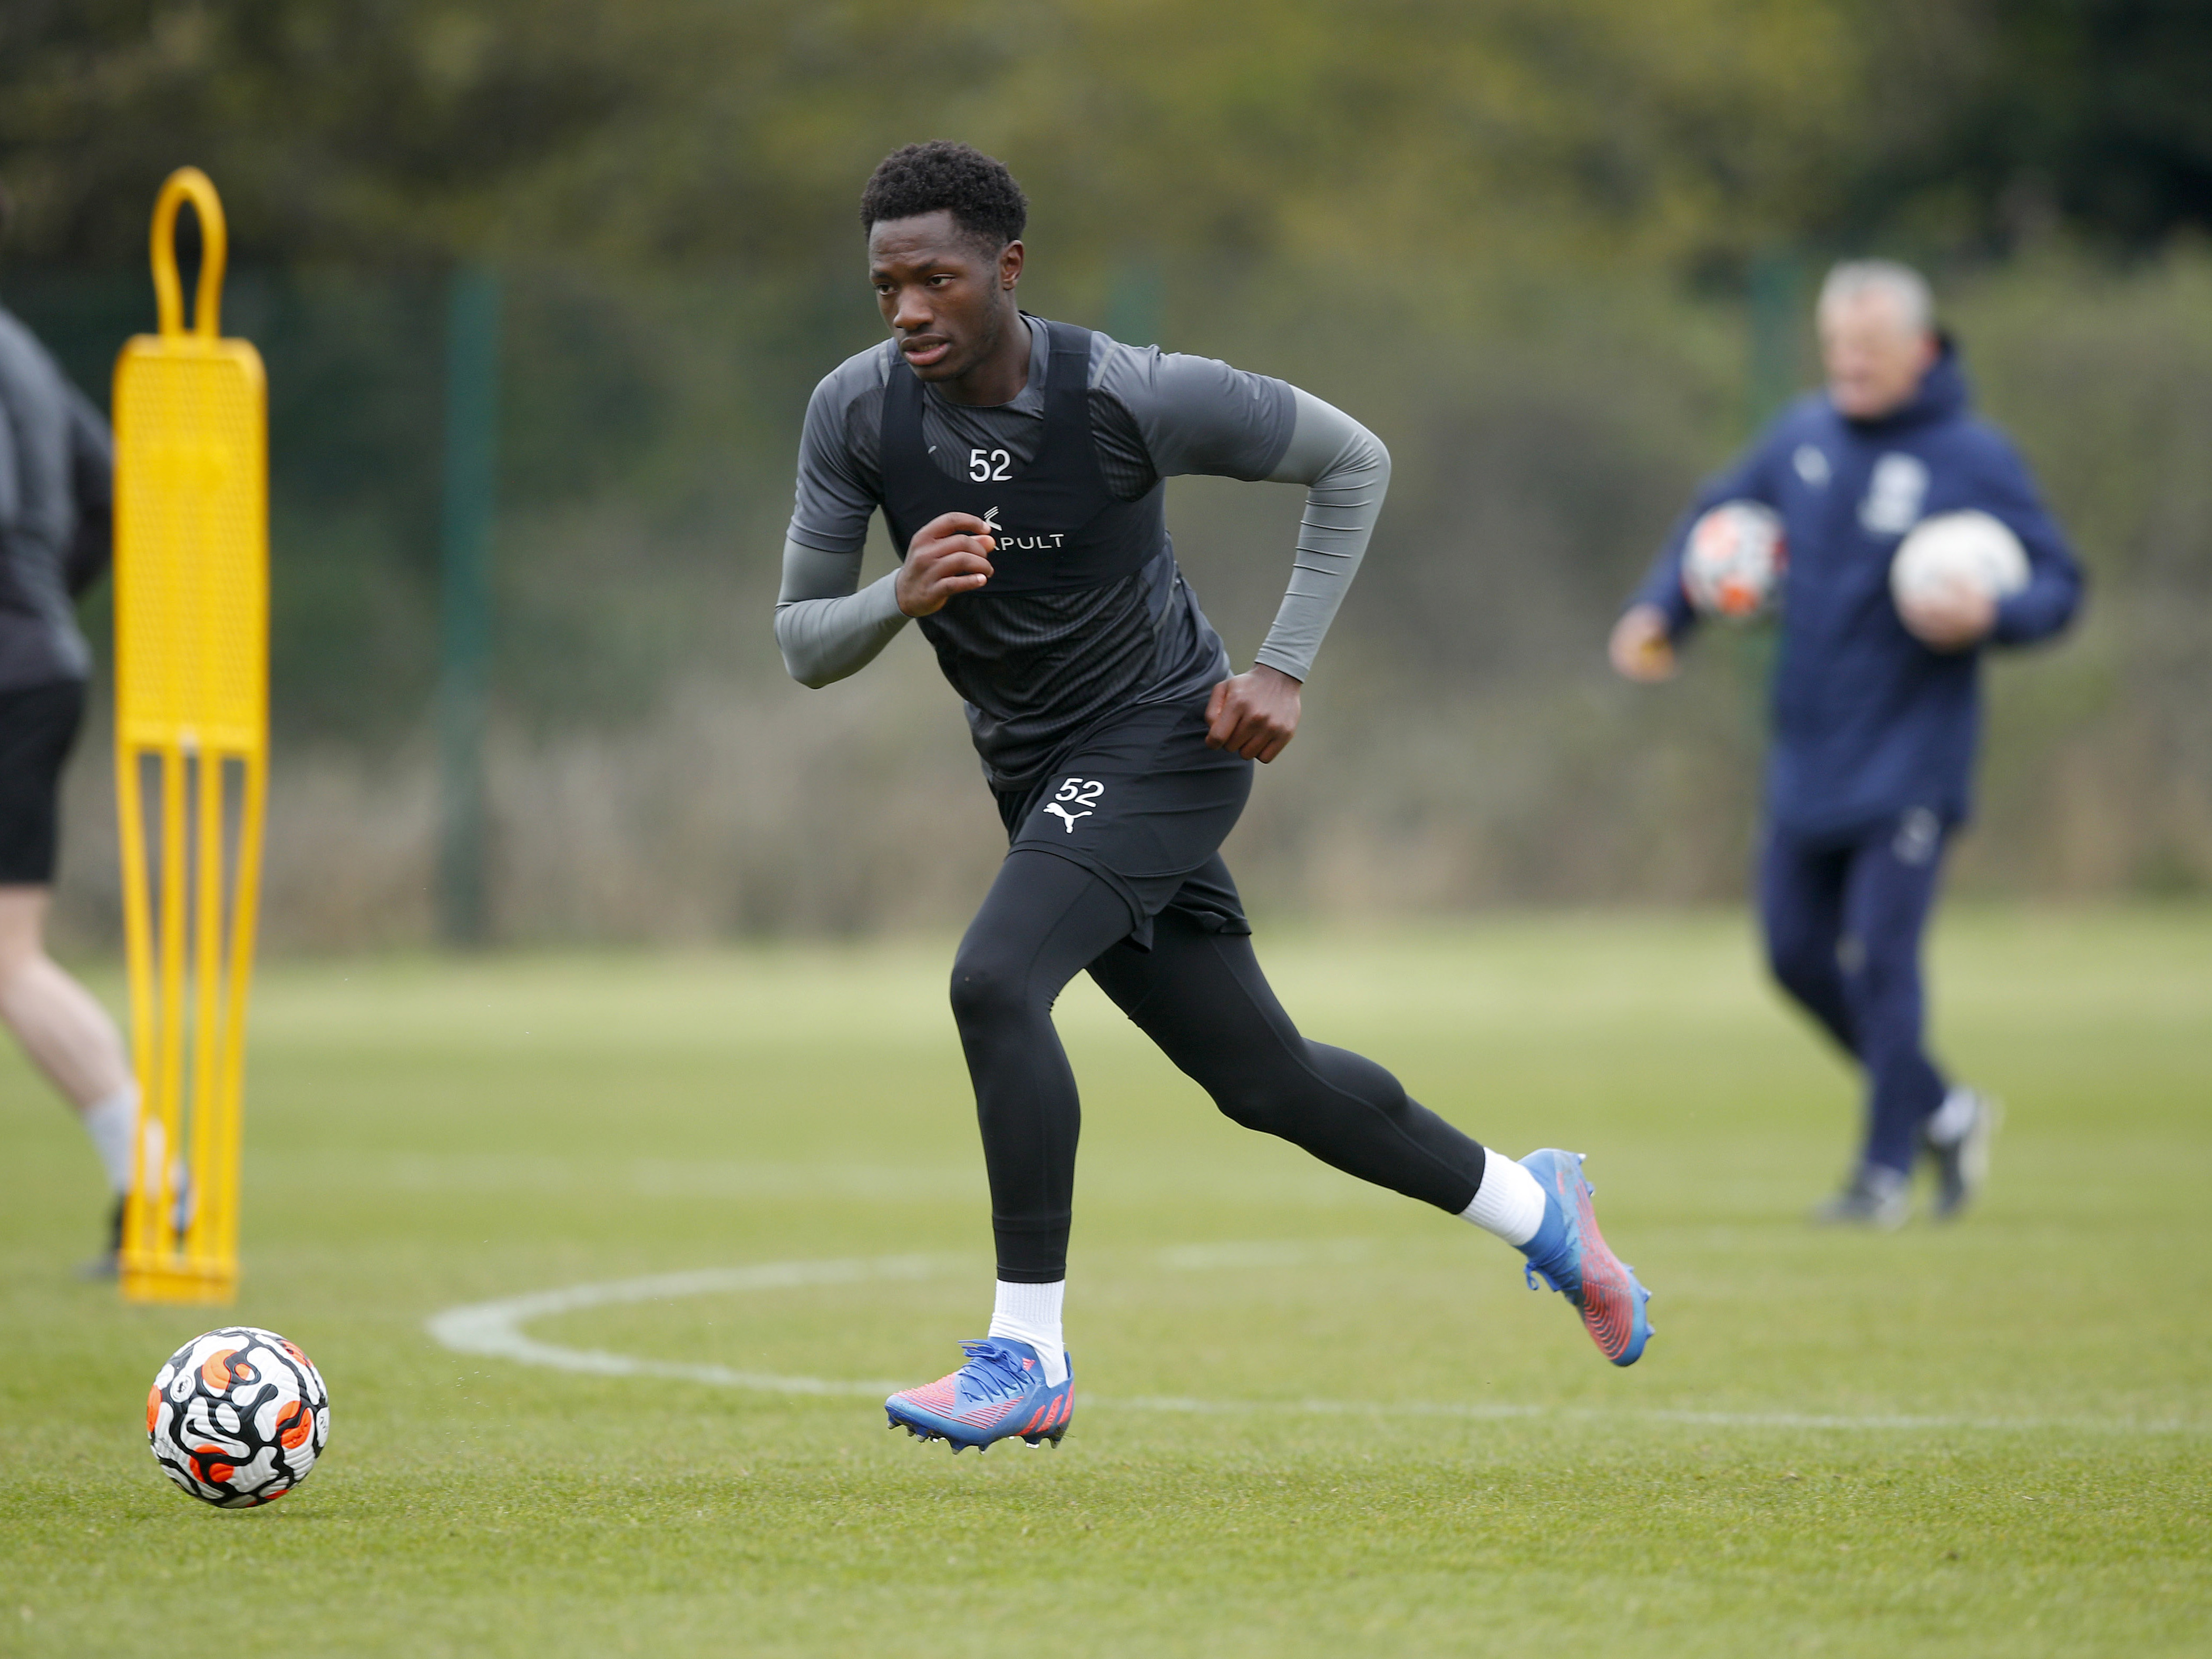 Albion's Under-23s prepare for their PL Cup semi-final 18